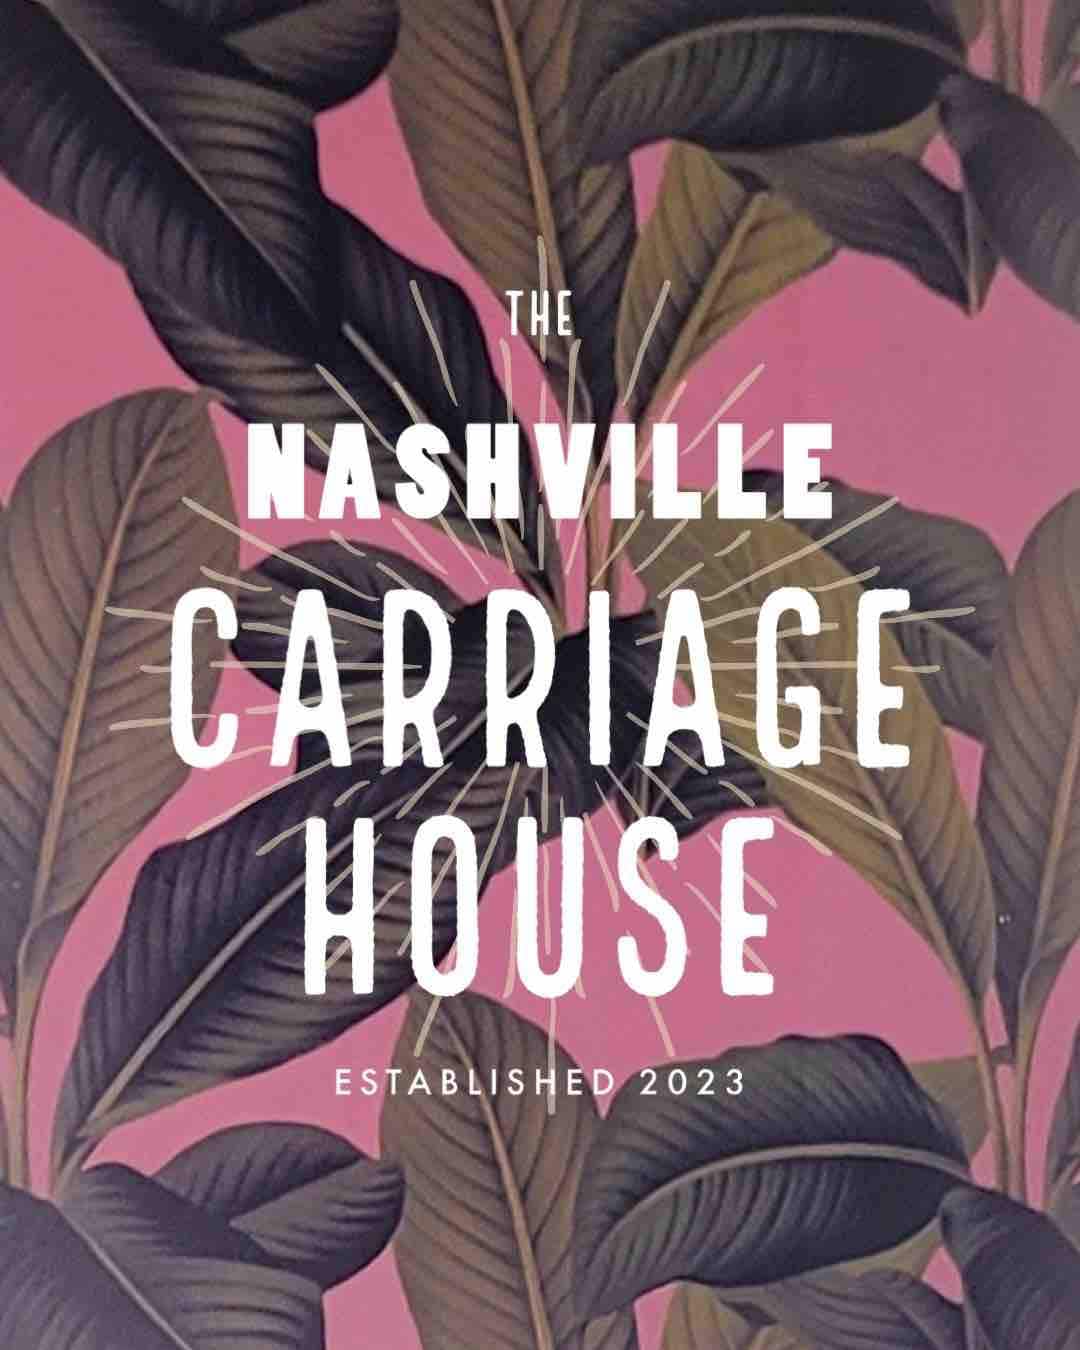 The Nashville Carriage House